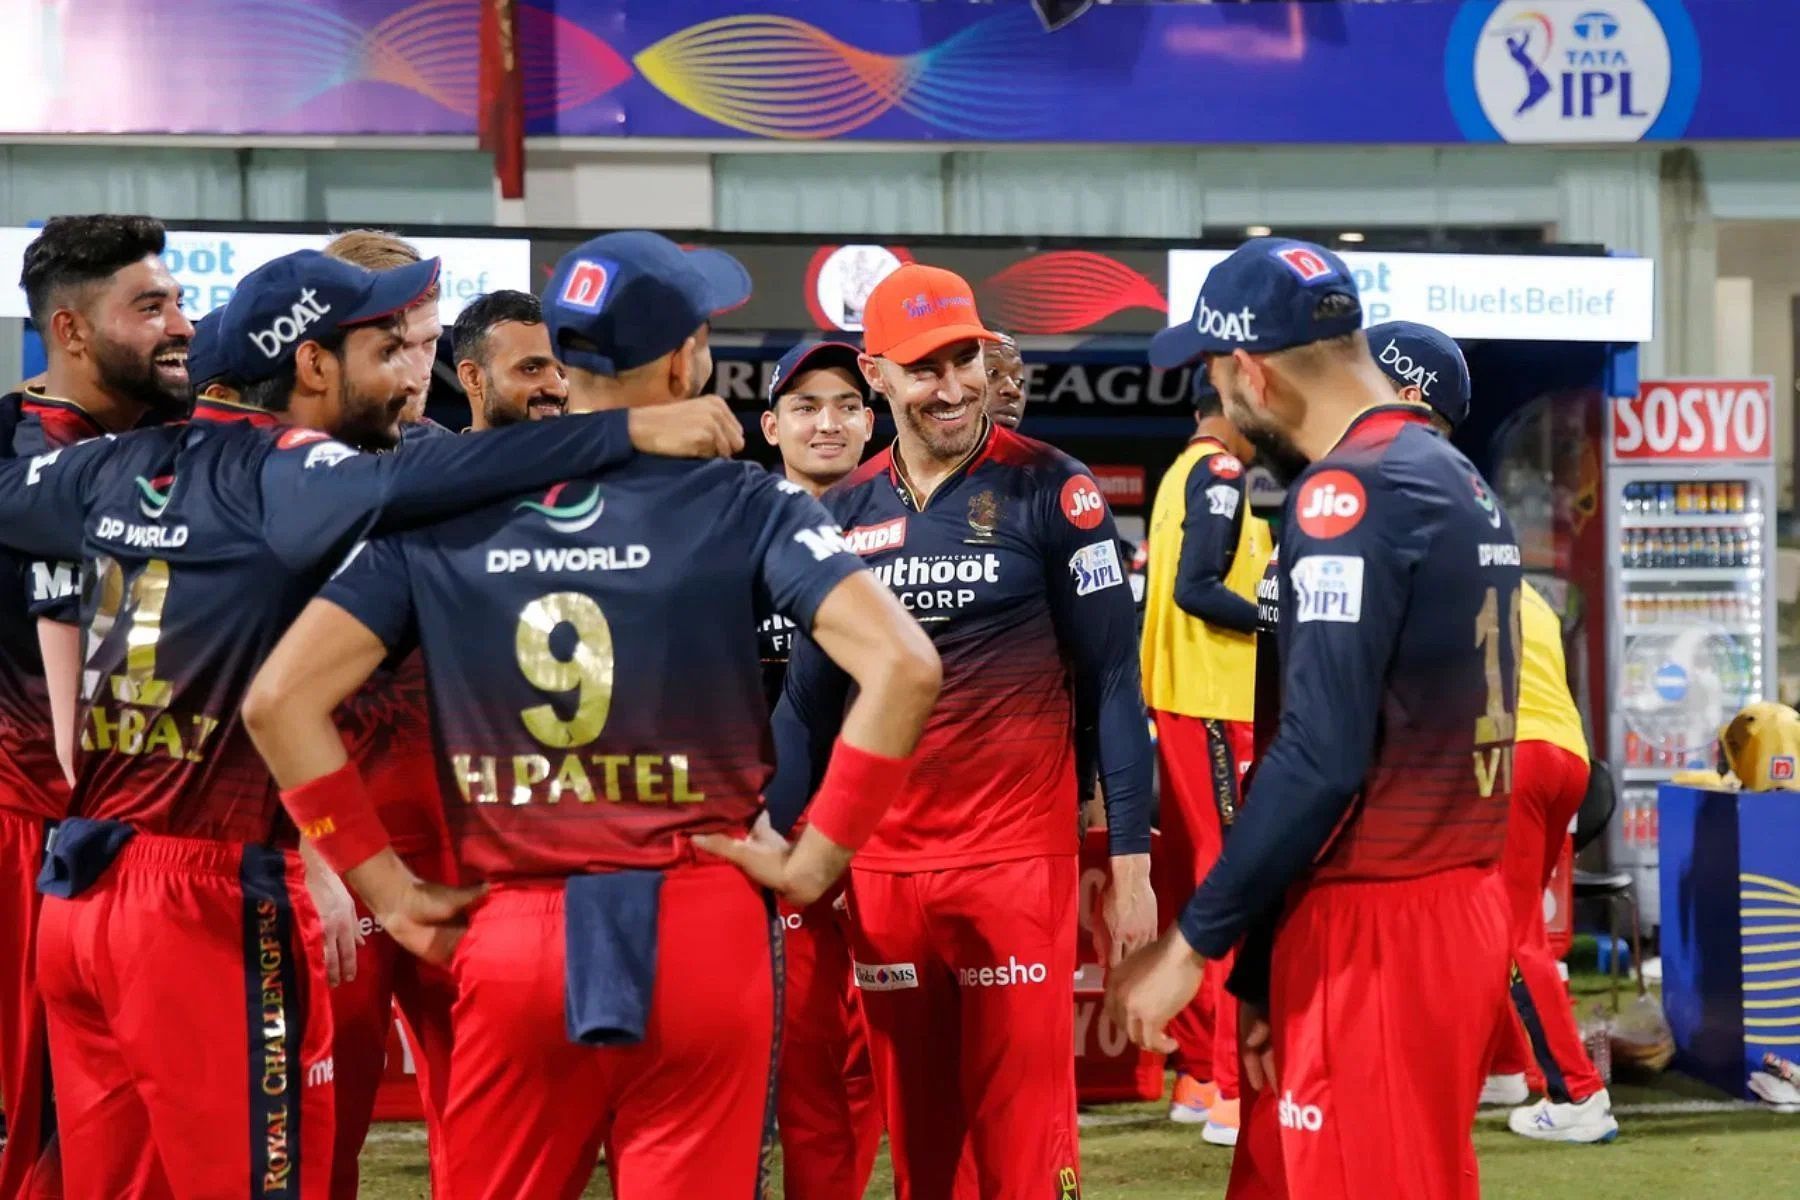 The Royal Challengers Bangalore will hope to win their maiden IPL title. [P/C: iplt20.com]